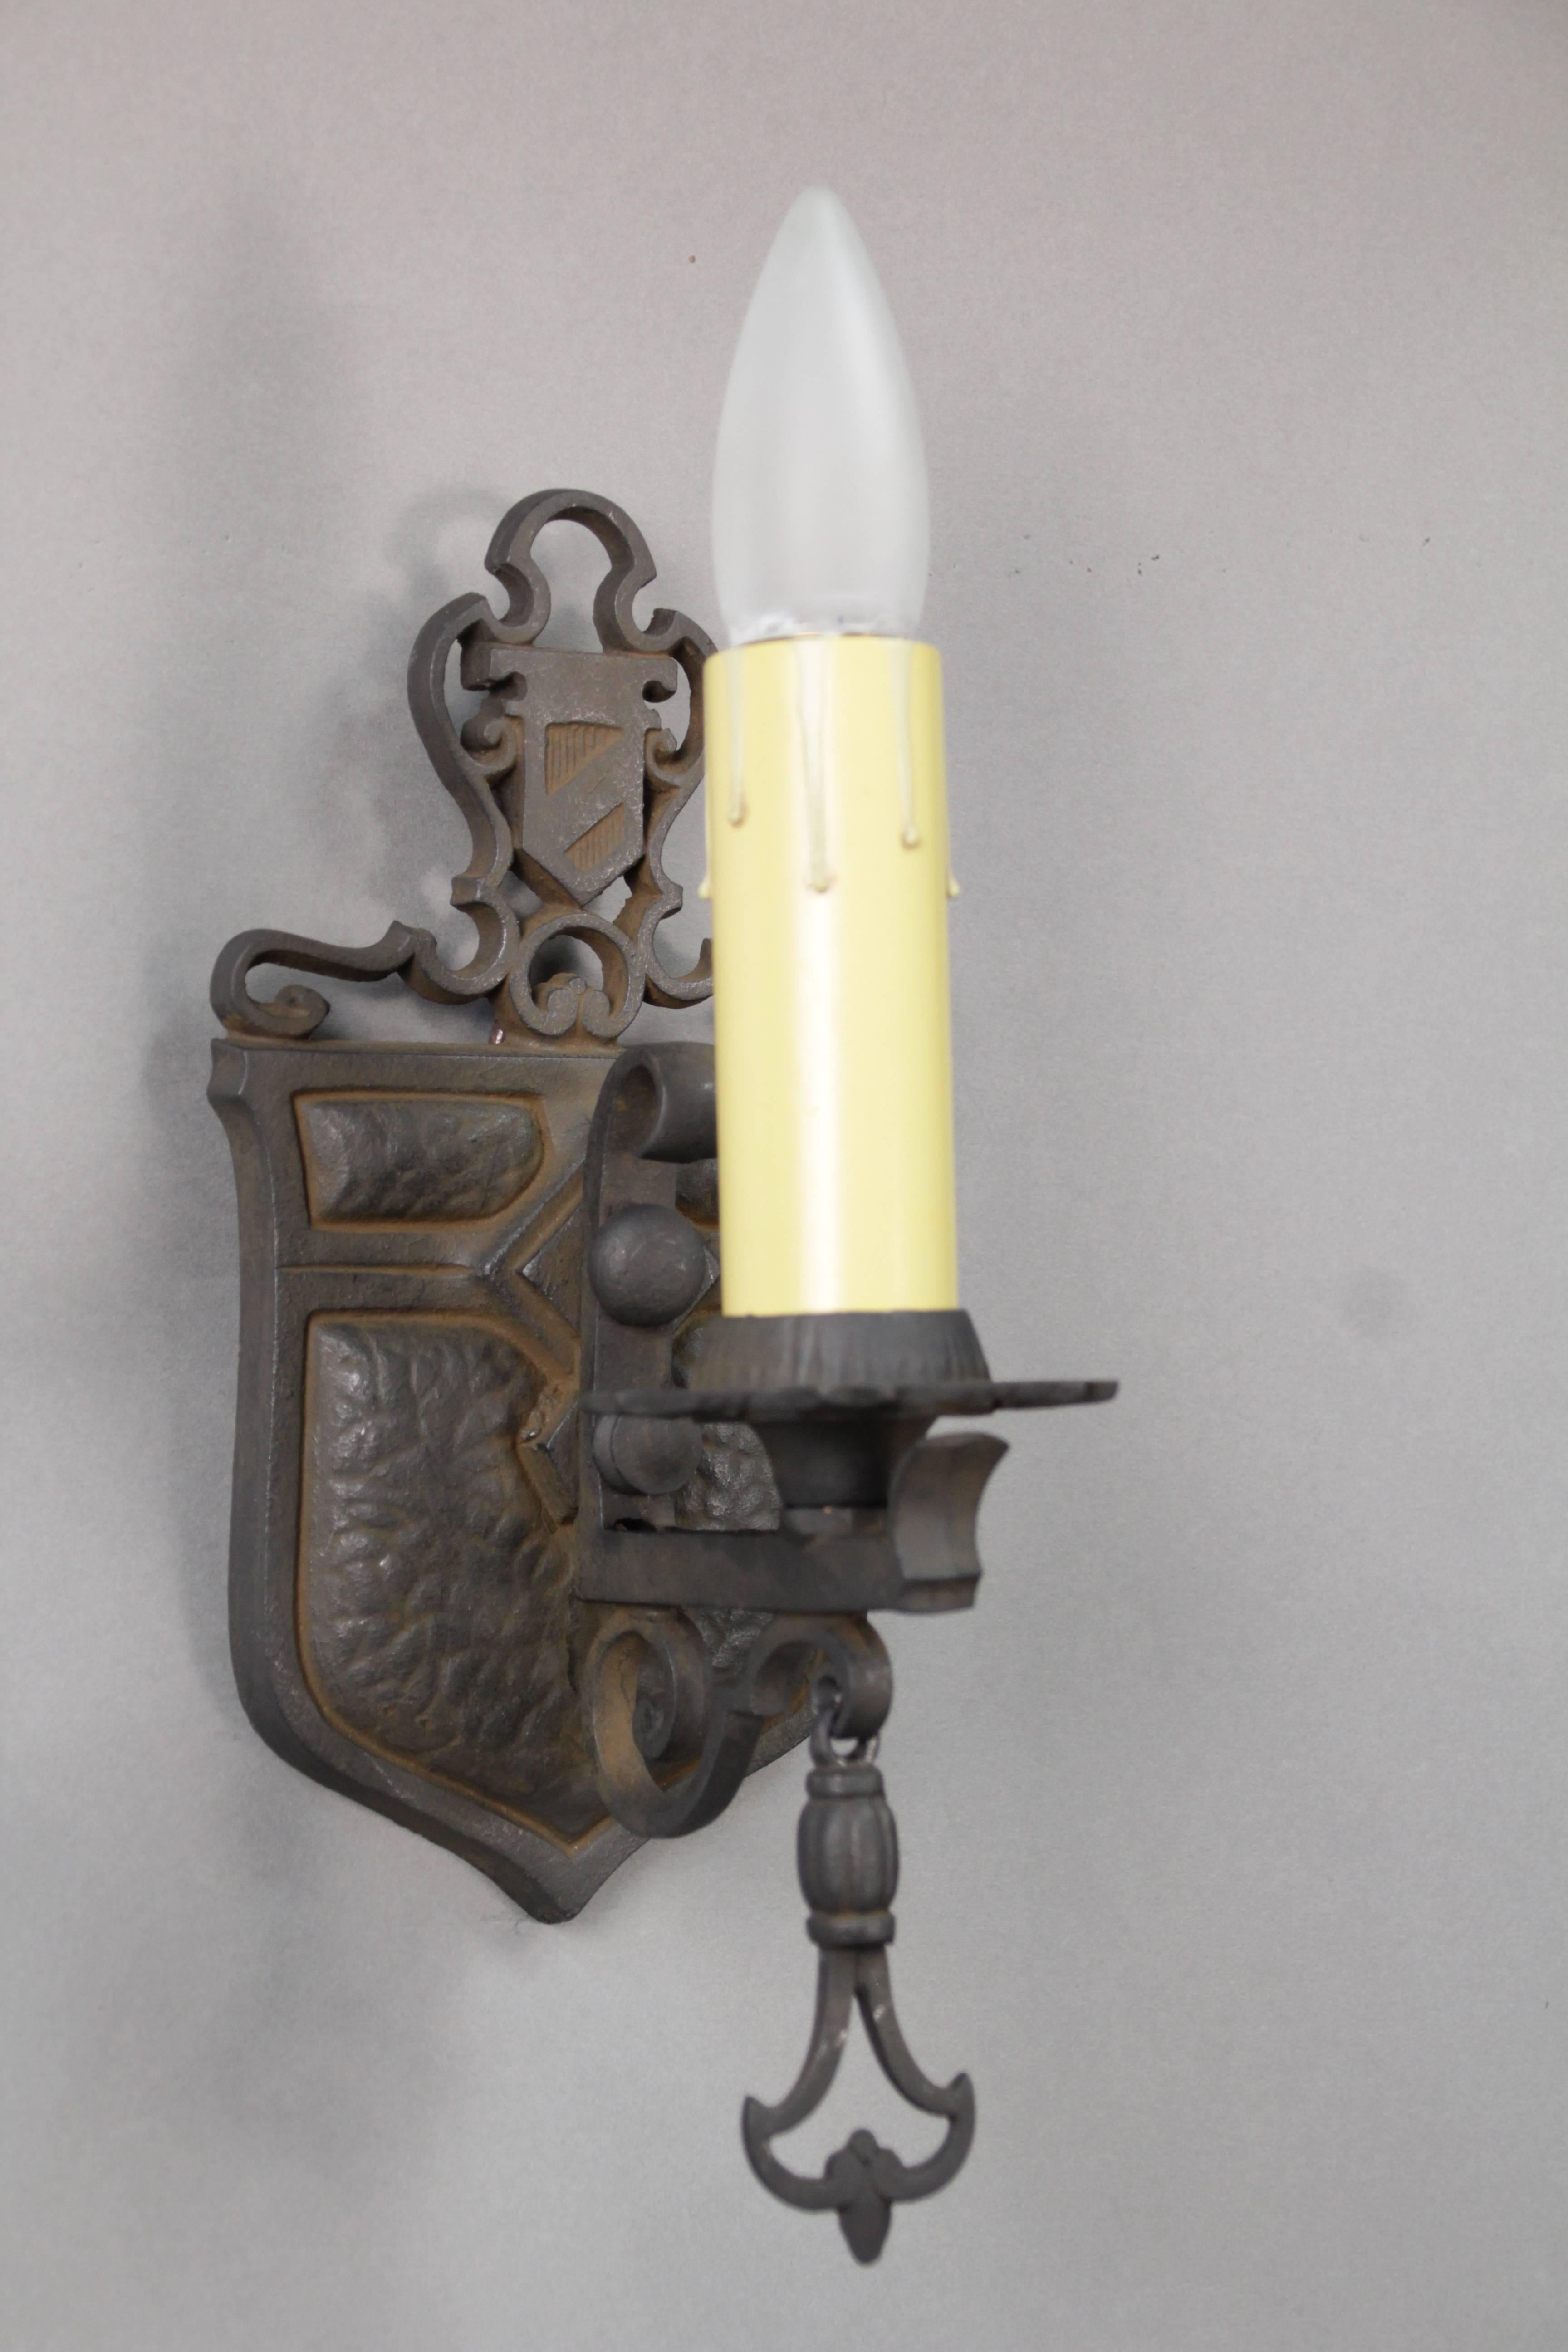 Spanish Revival single sconce with crest motif, circa 1920s.